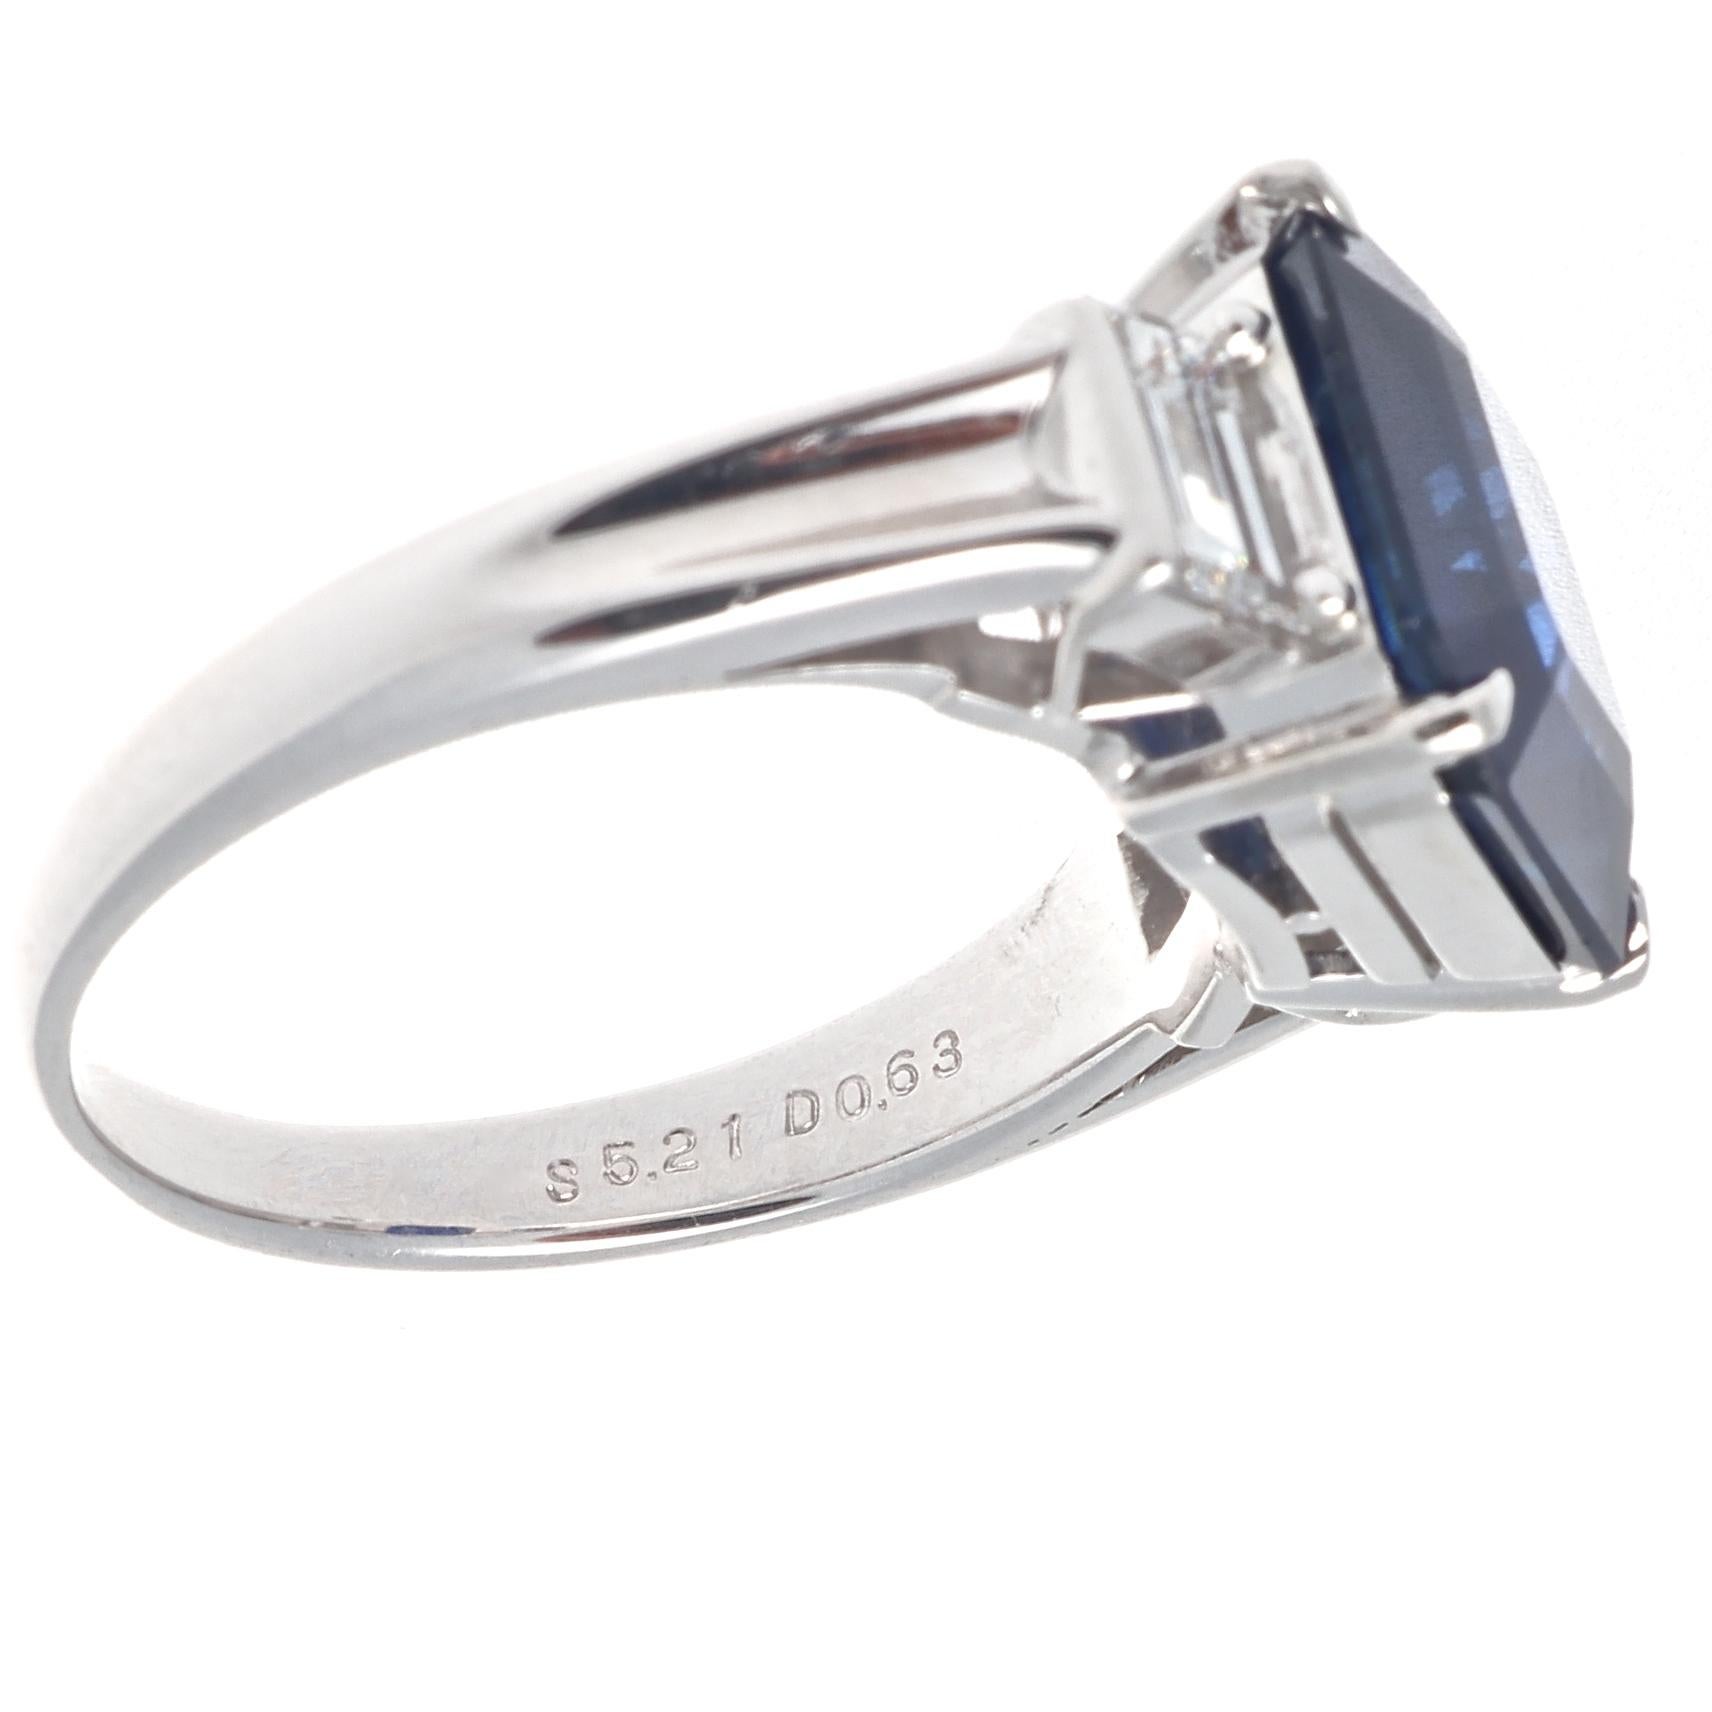 A modern version of the classic engagement ring. Featuring a 5.21 carat octagonal cut sapphire that is accompanied with an AIGS certificate stating it is a natural royal blue sapphire from the Madagascar region with indications of heating. Accented